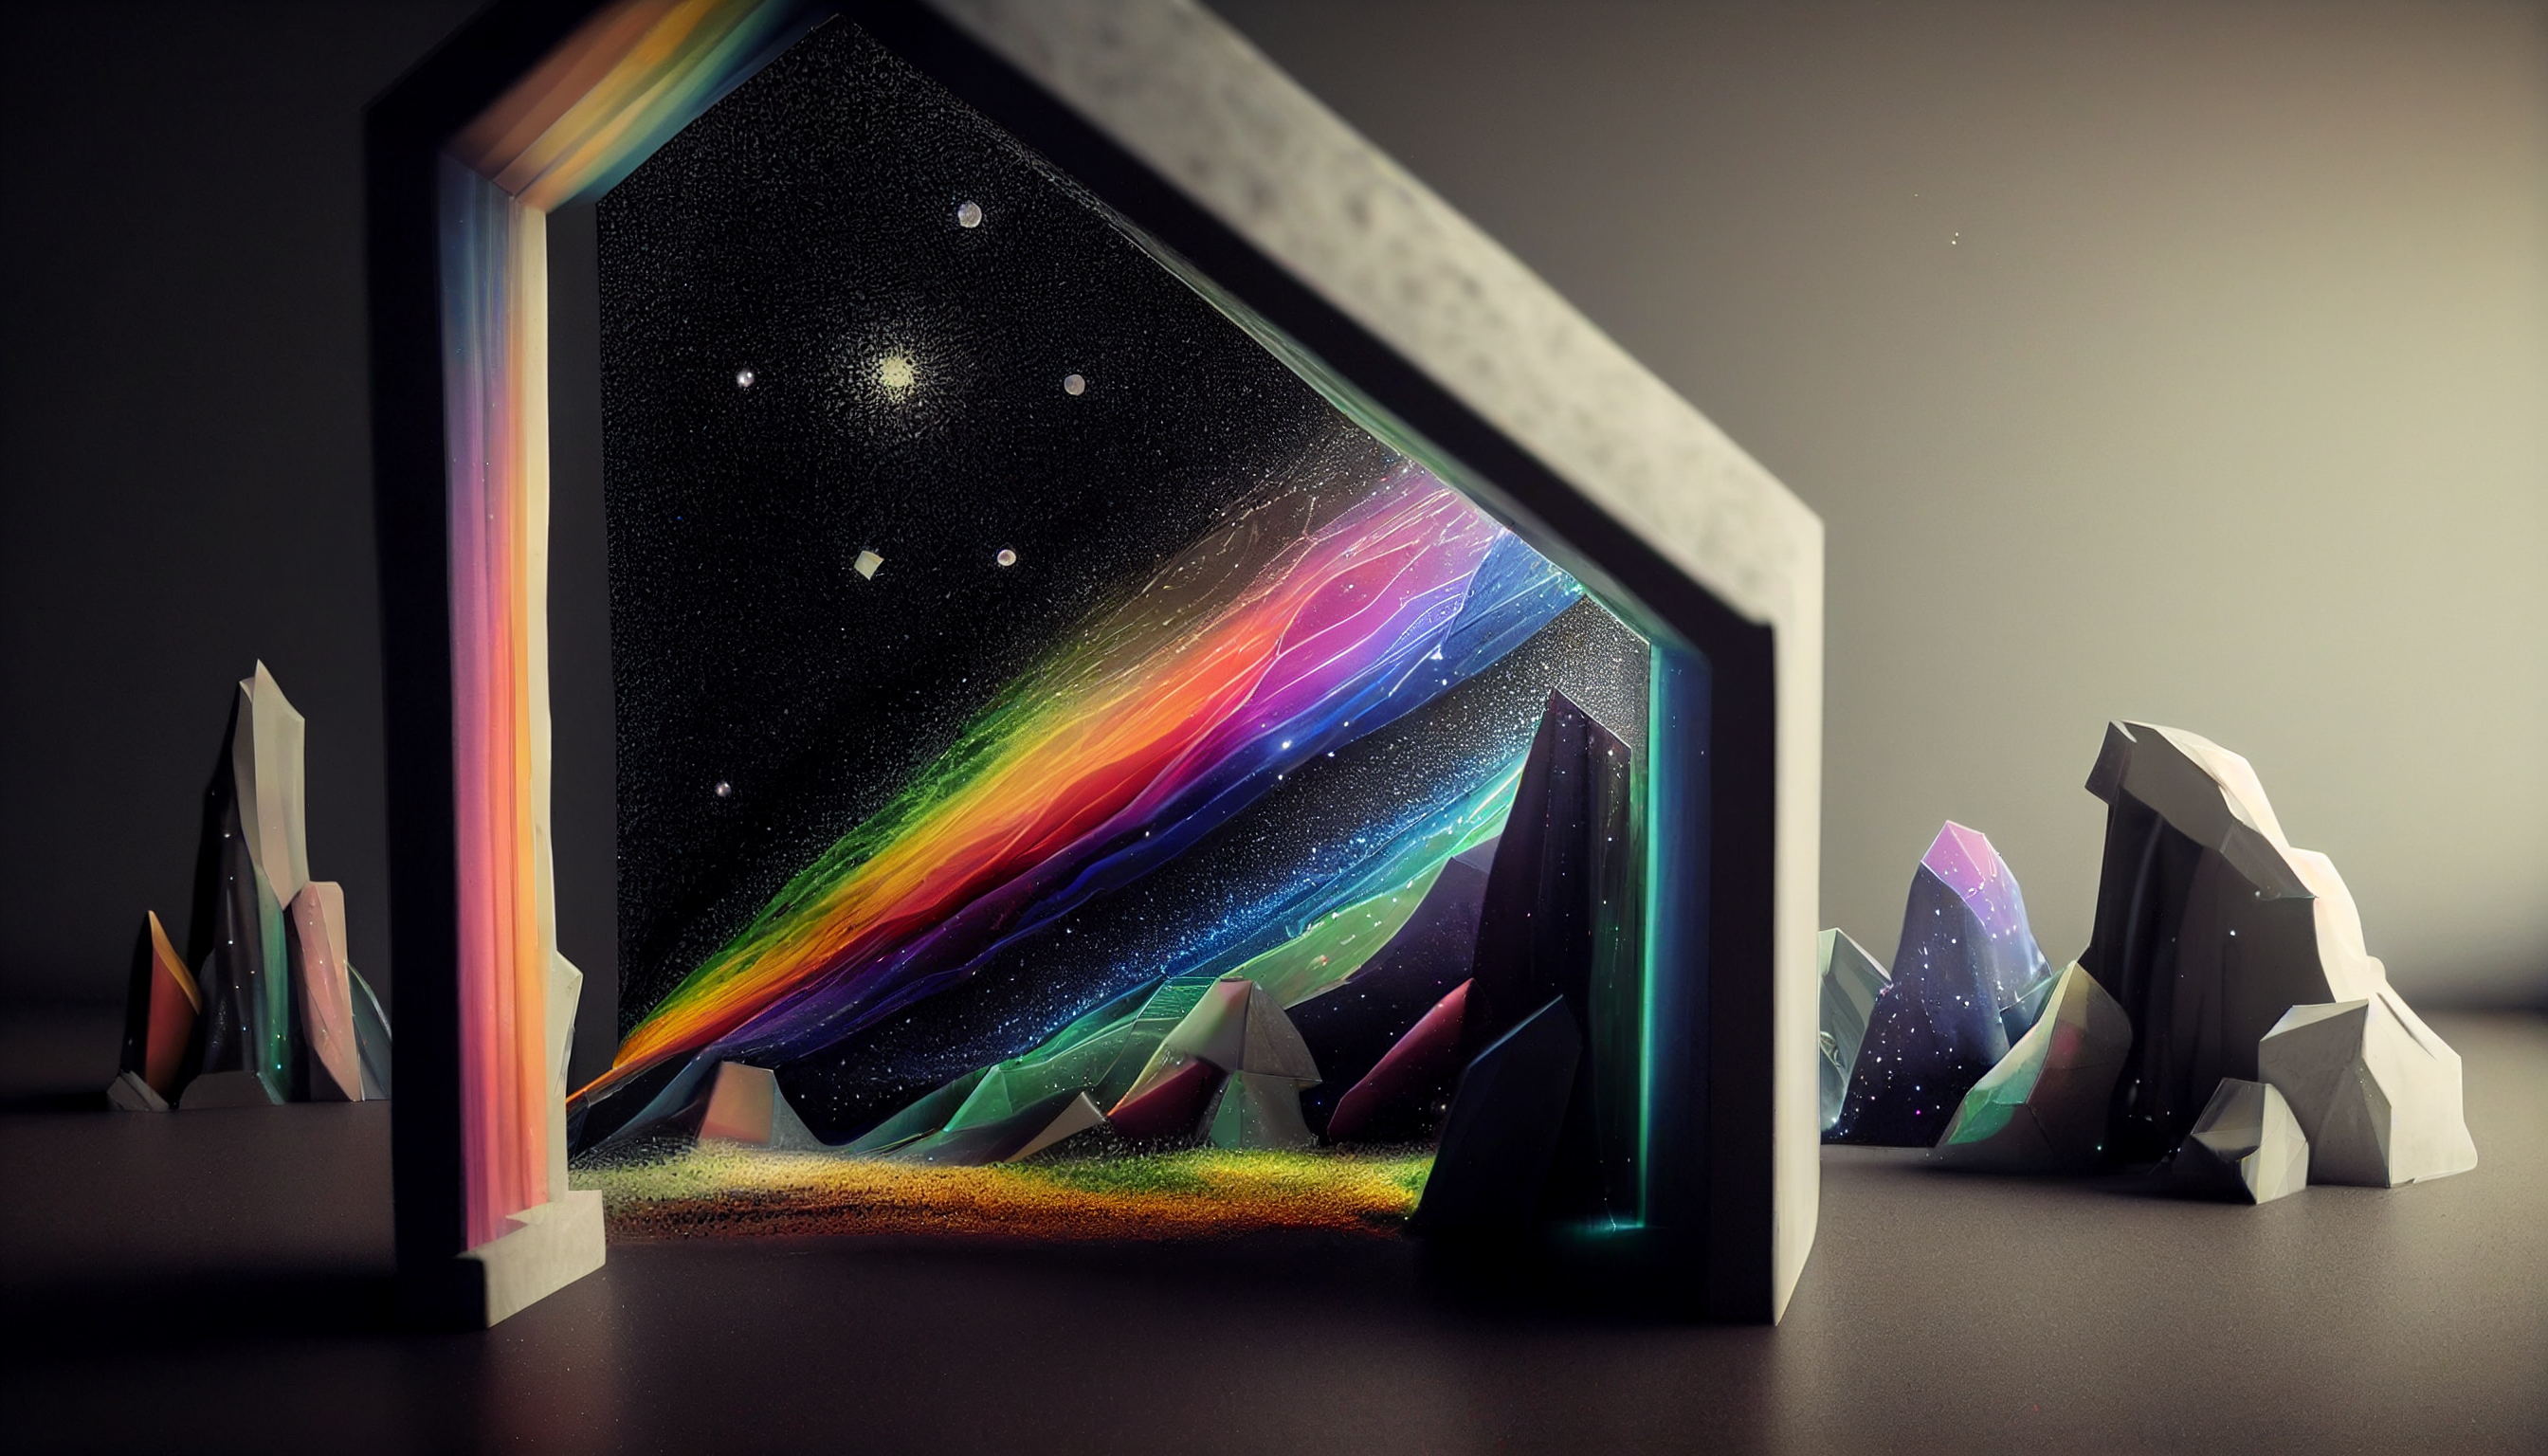 General 2688x1536 AI art prism Refraction spectrum Midjourney portal colorful arch galaxy depth of field stars starscape illusions illusion procedural generation trippy psychedelic rock formation